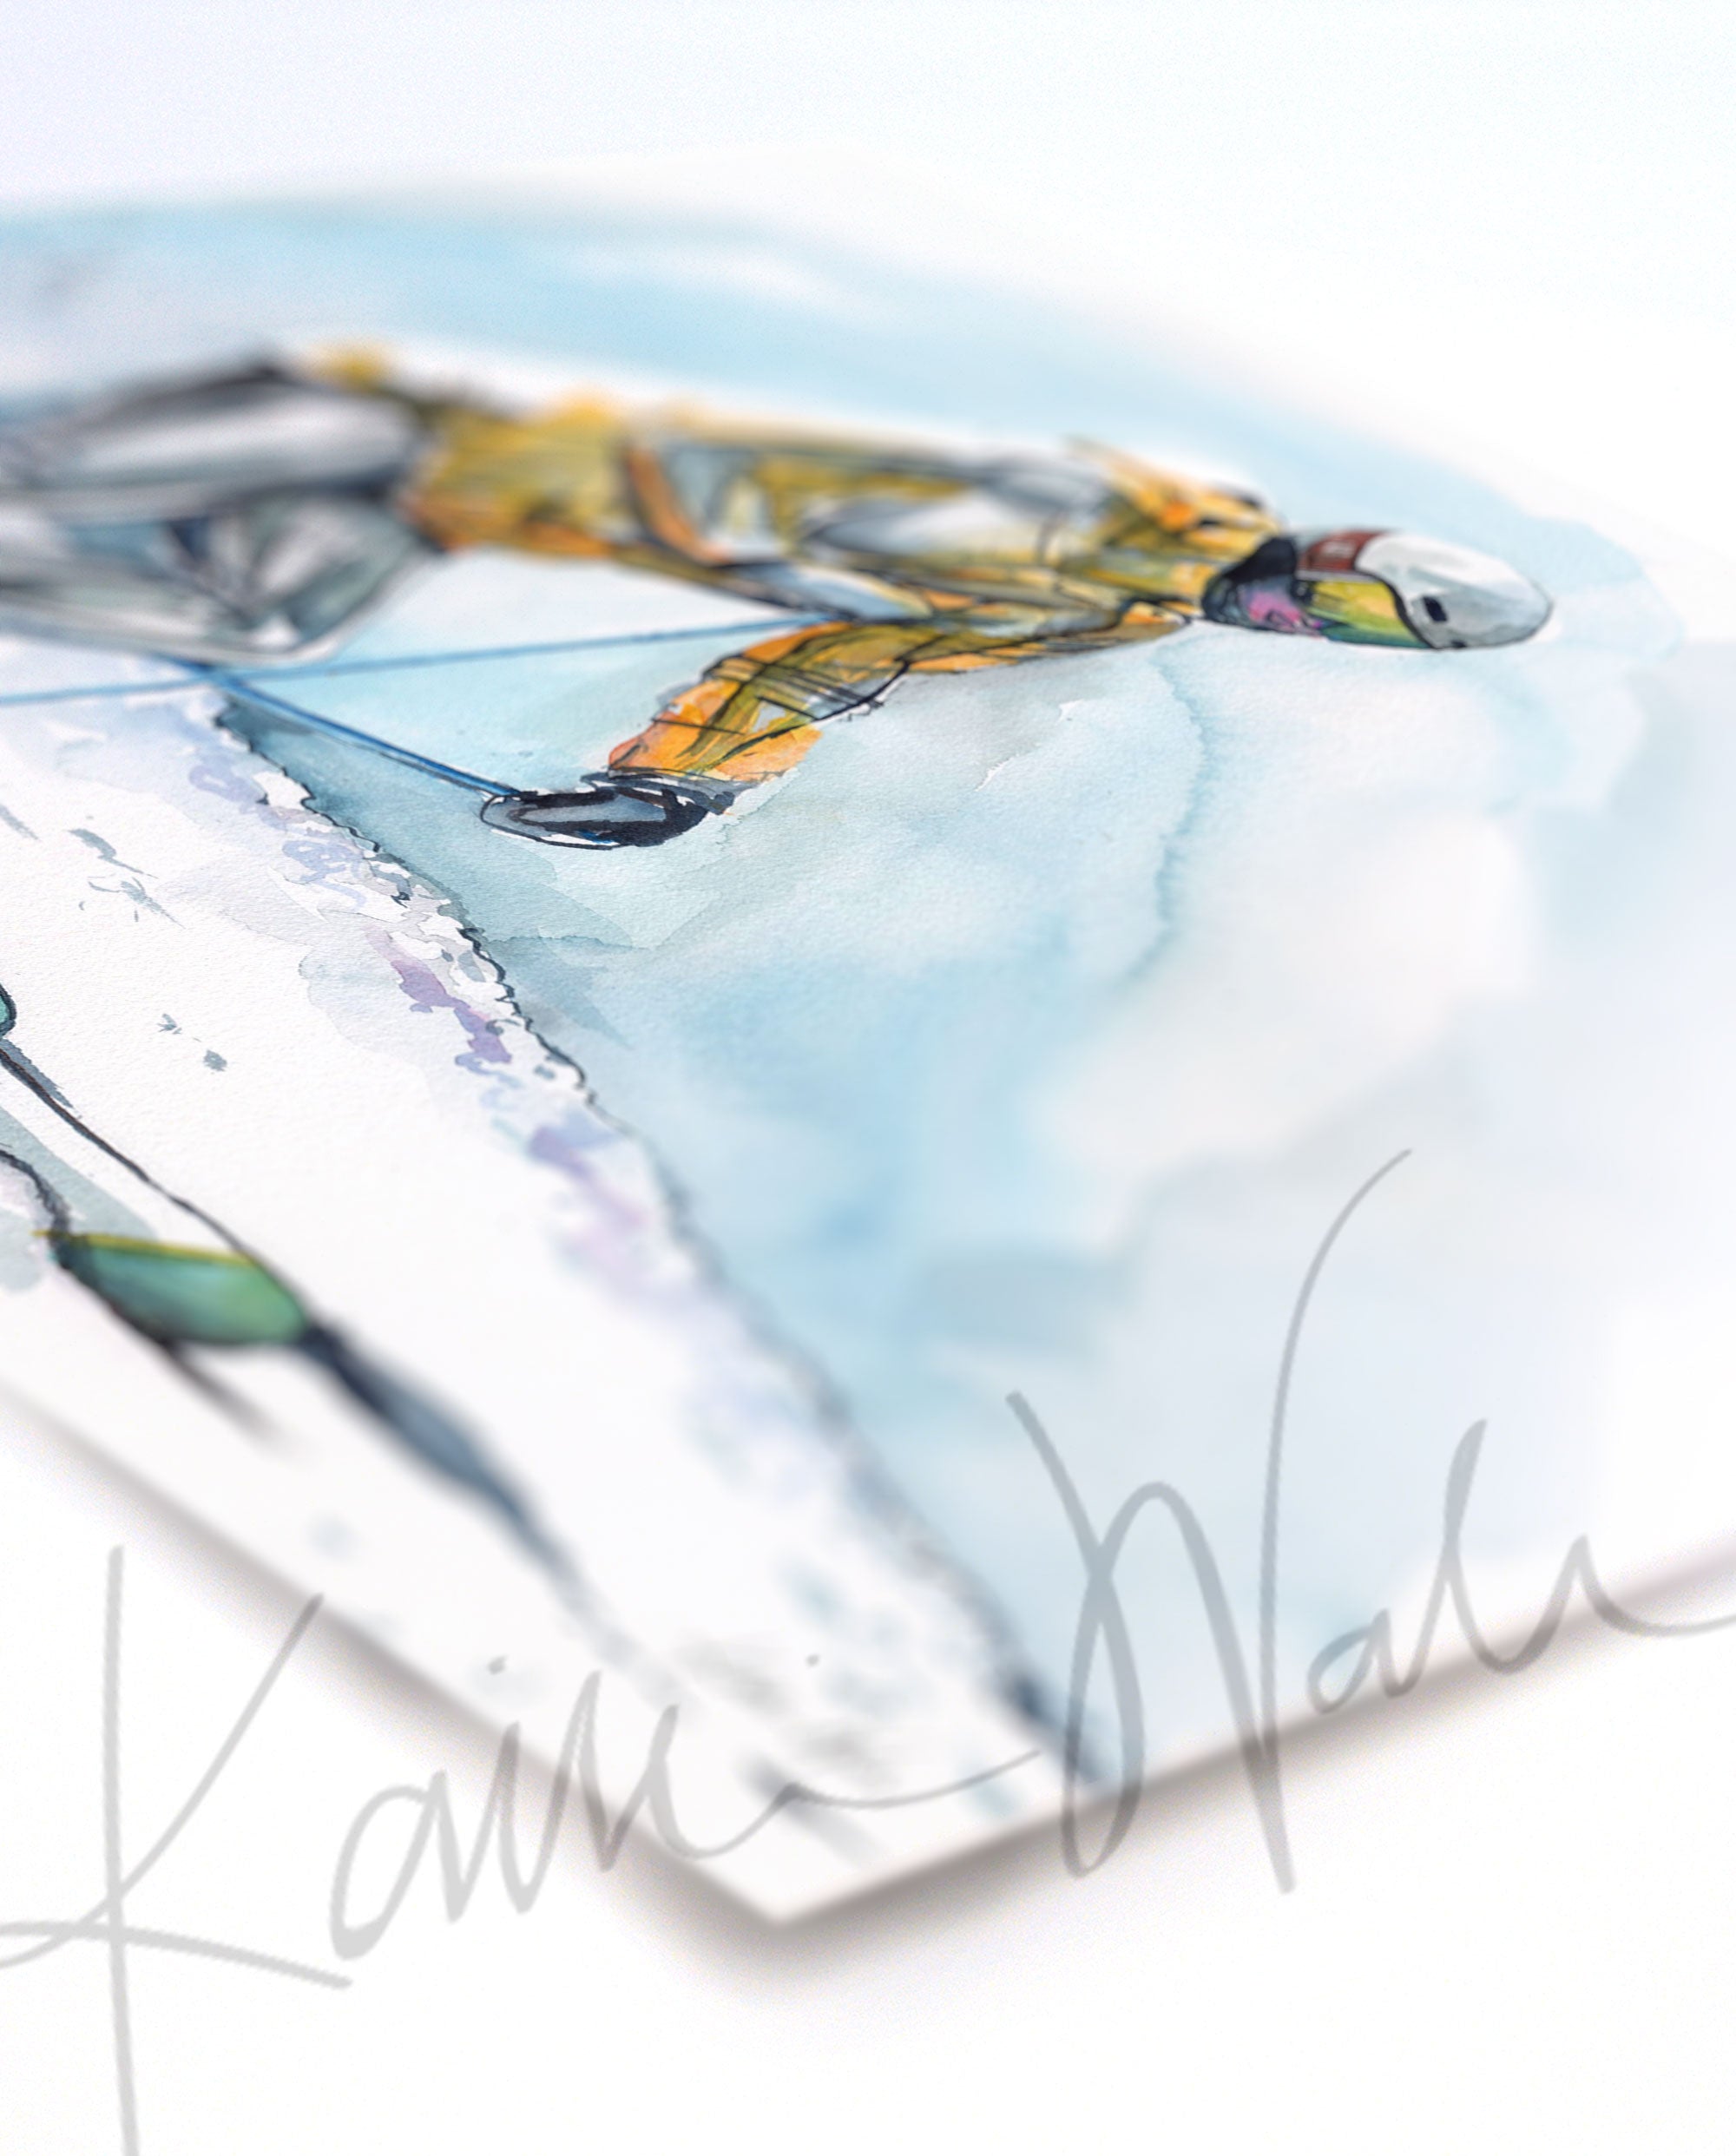 Angled view of a watercolor painting of a skier going down a ski hill with their muscle anatomy showing under their clothing.